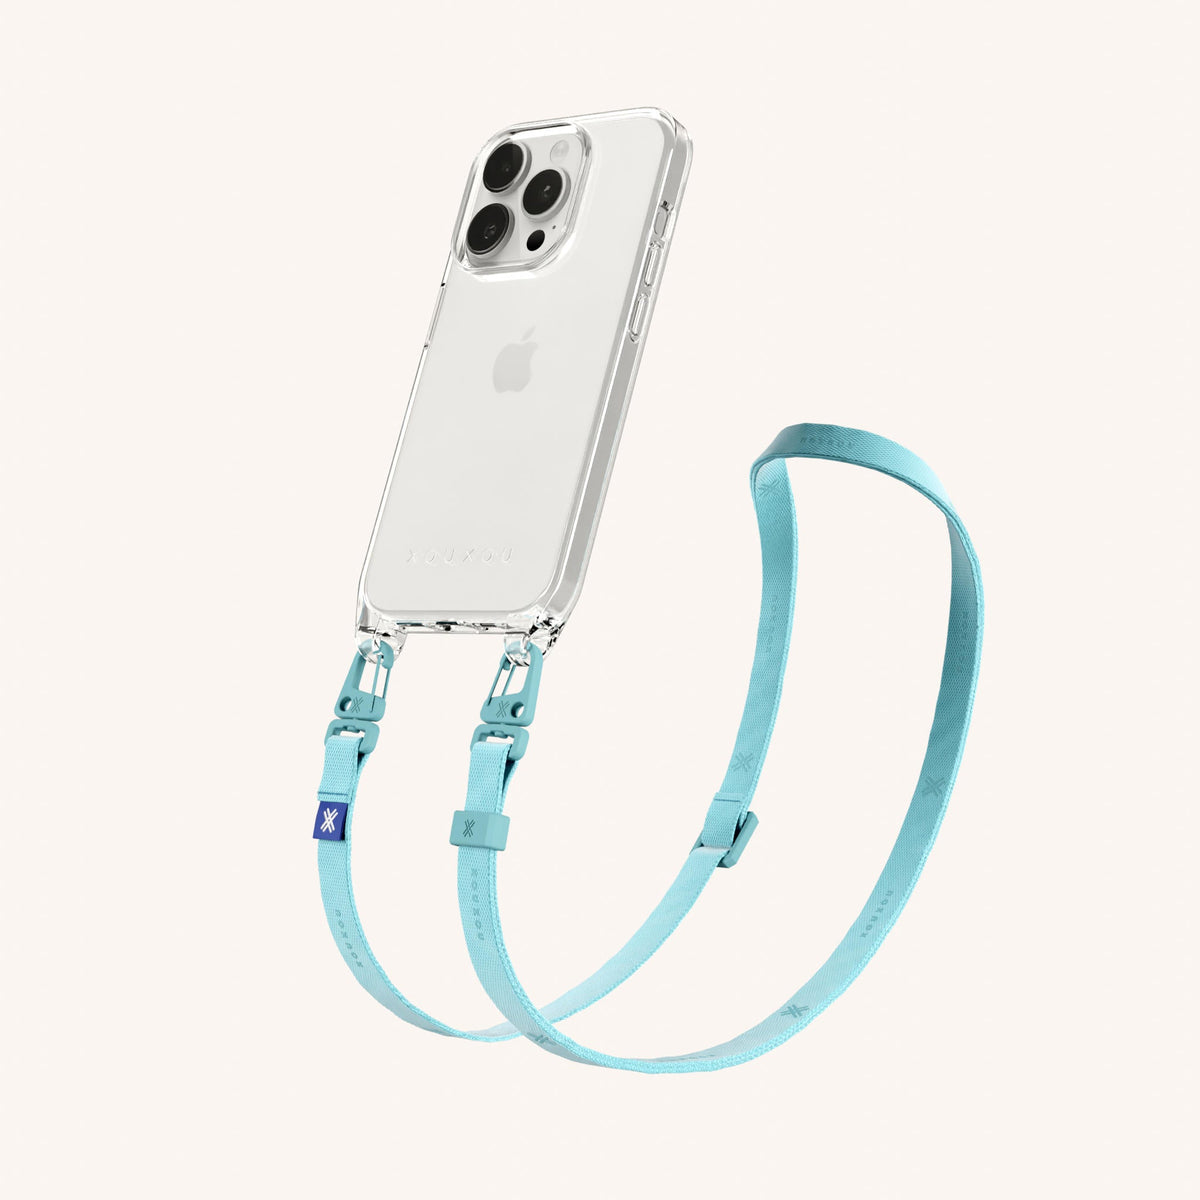 Clear Phone Necklace with Slim Lanyard for iPhone 15 Pro without MagSafe in Clear + Pool Perspective View | XOUXOU #phone model_iphone 15 pro